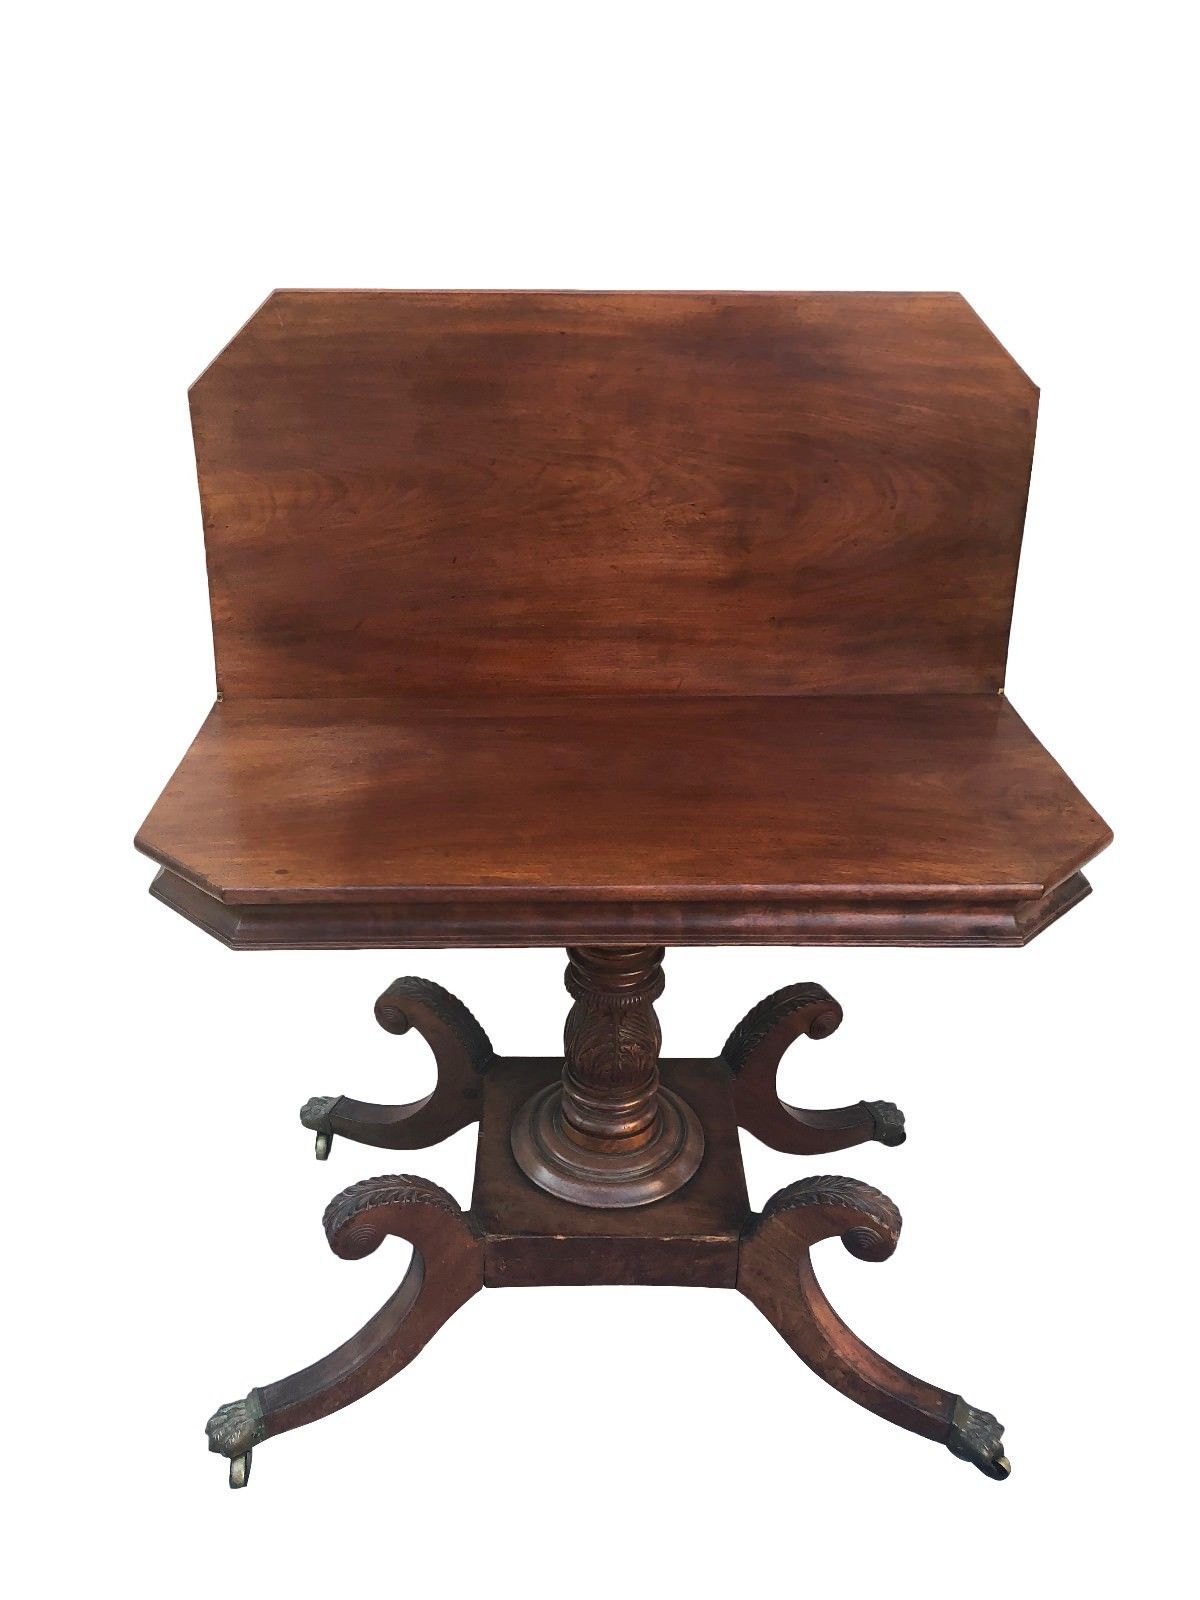 EARLY 19TH CENTURY CLASSICAL CROSS BANDED INLAID PHILADELPHIA CARVED GAME TABLE